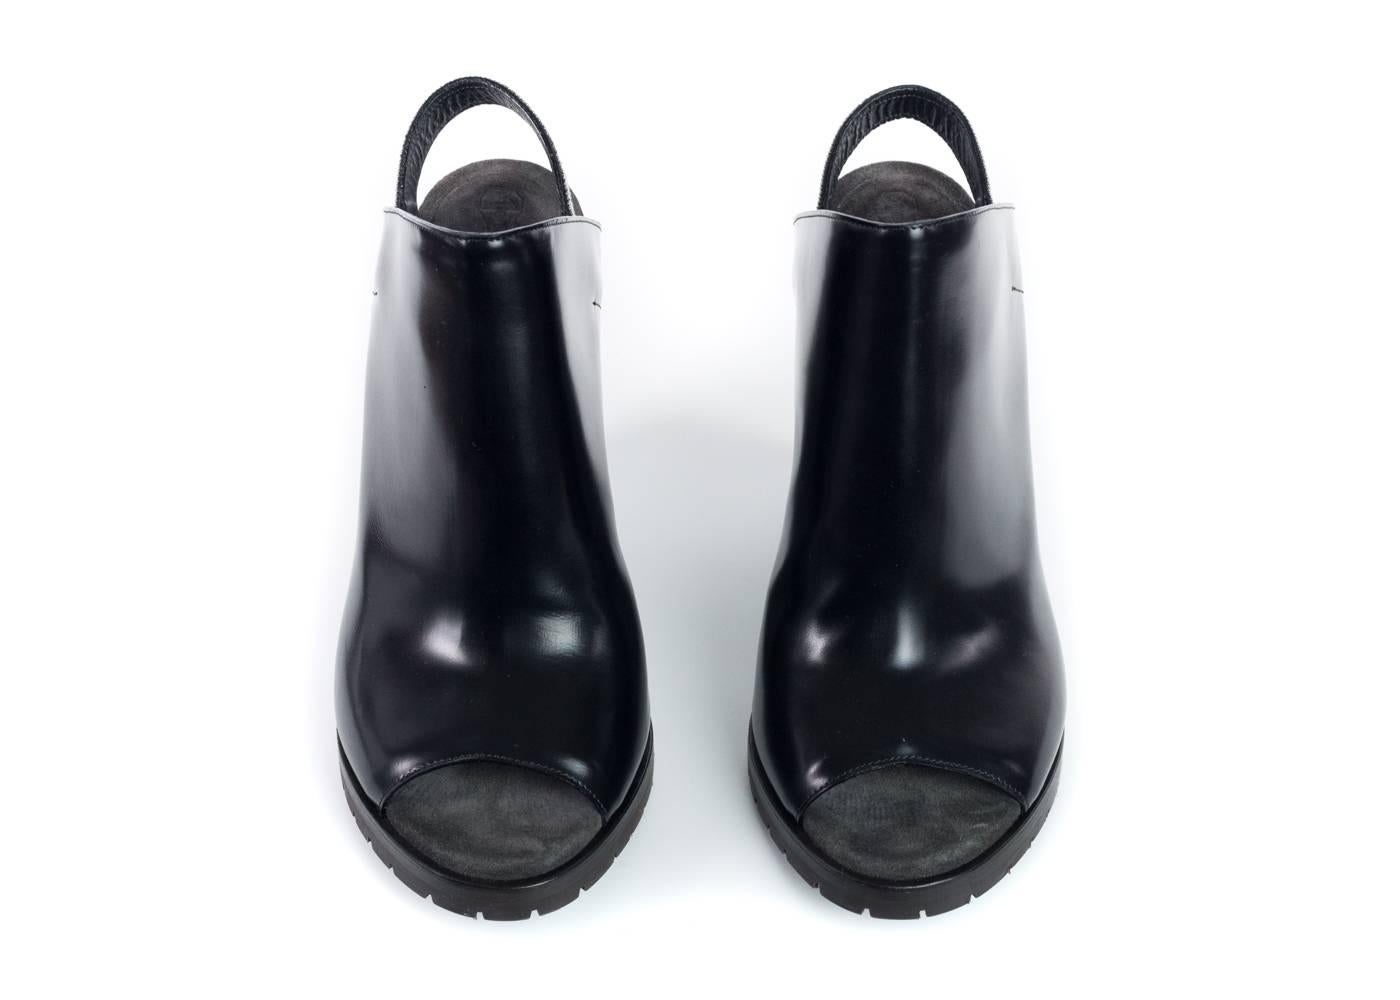 Brand New in Original Box with Dust Bag
Estimated Retail in Stores and Online $1800
Size 40 / 10 Fits True To Size

These beautiful Brunello Cucinelli shoes feature monili strap, open toe silhouette and a wedge heel. Crafted from soft  leather,